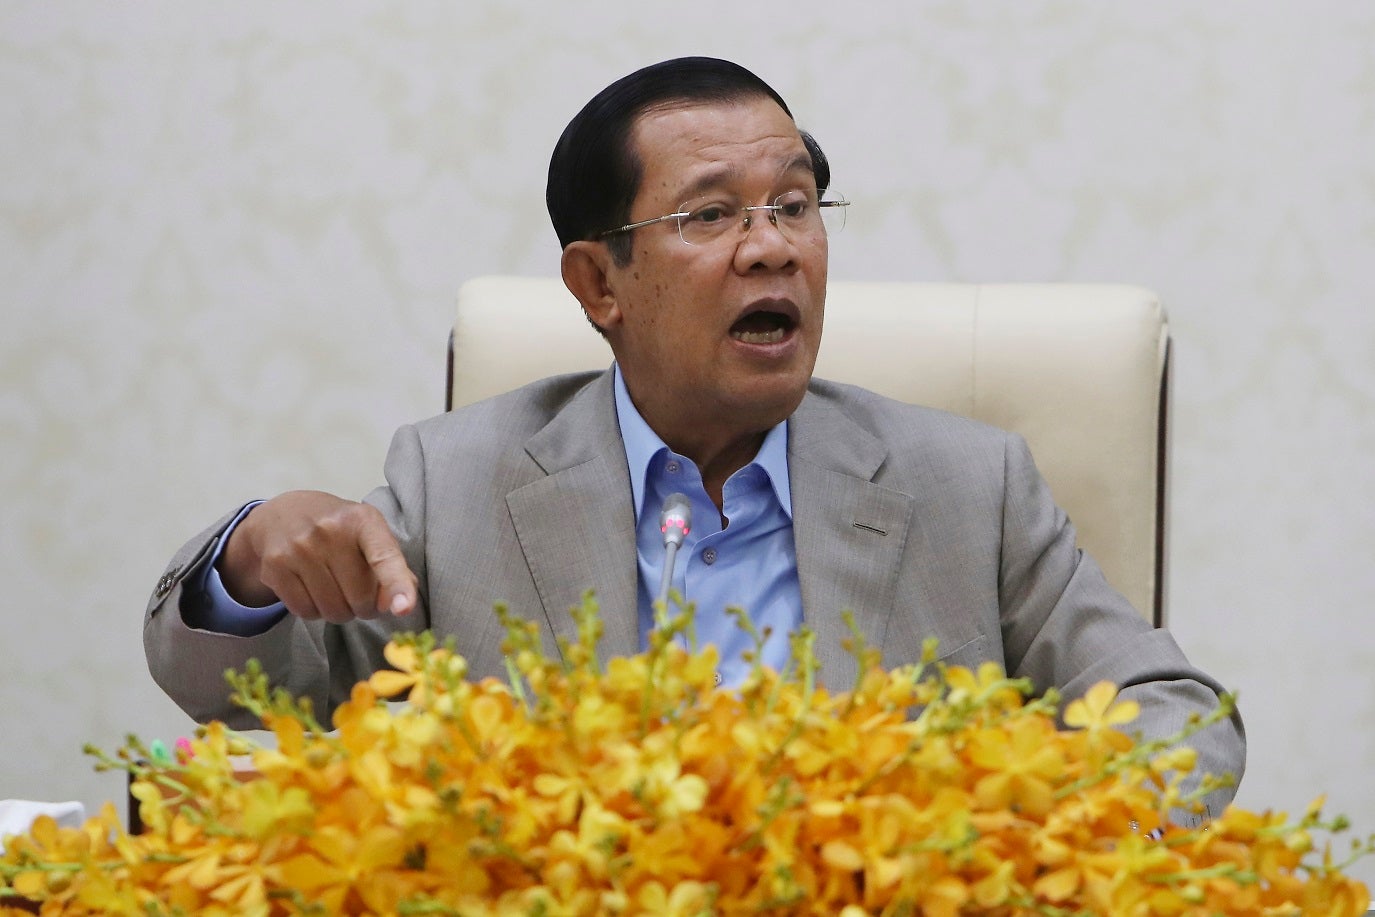 Cambodia's Prime Minister Hun Sen gestures during a speech on the current state of a new virus from China in Phnom Penh, Cambodia, Thursday, Jan. 30, 2020.